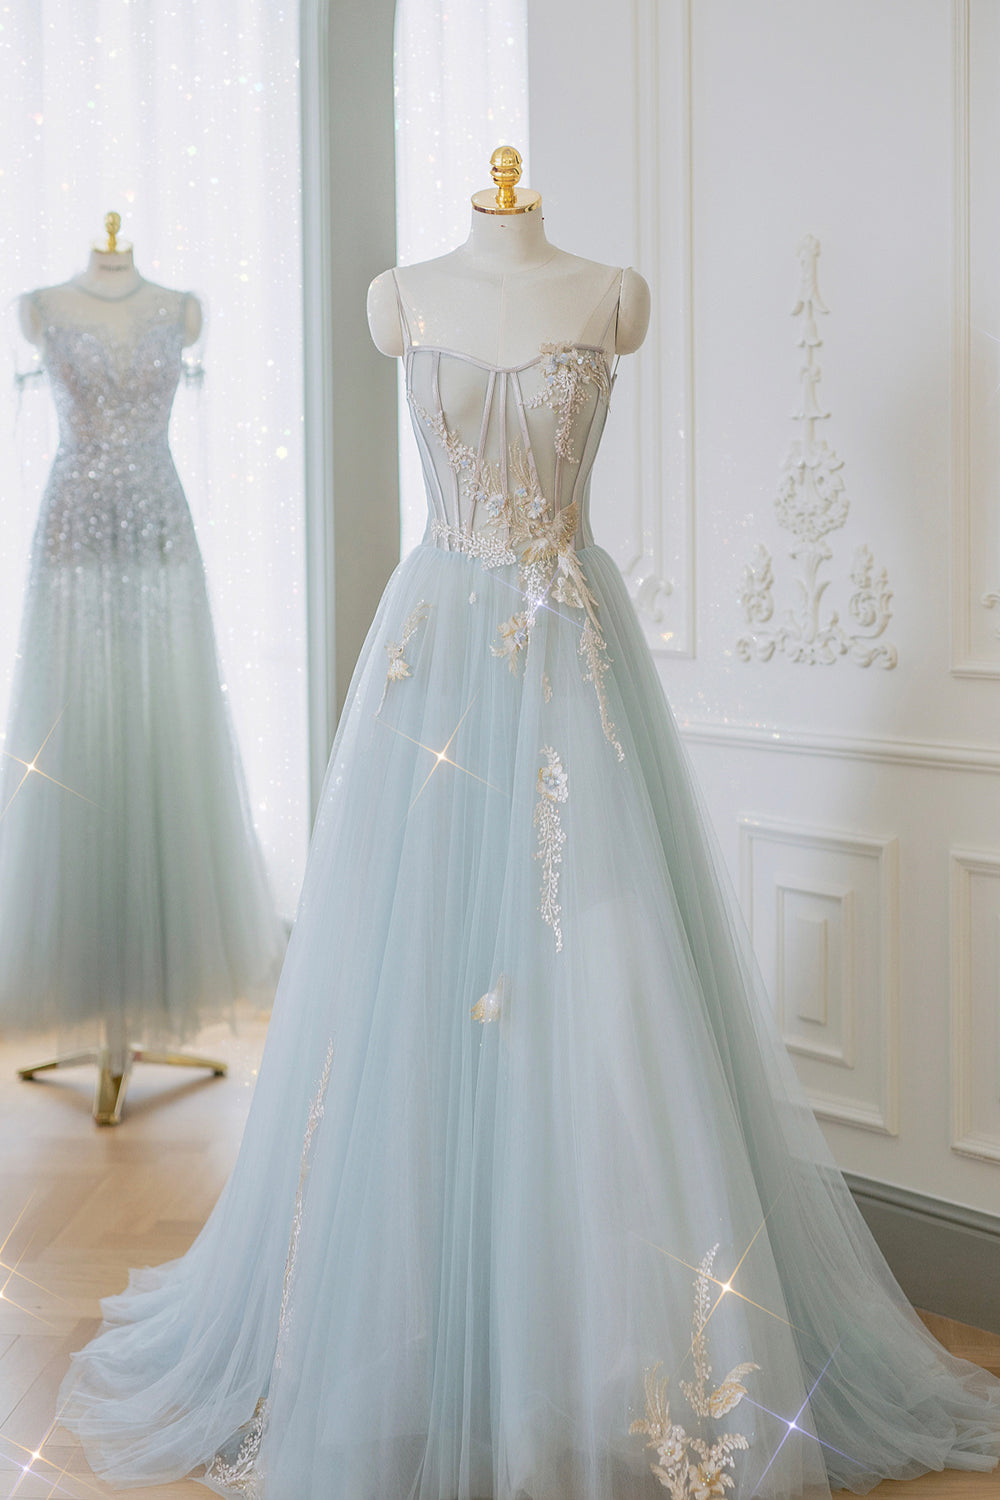 Blue Strapless Lace Formal Prom Dress, A-Line Tulle Evening Party Dress